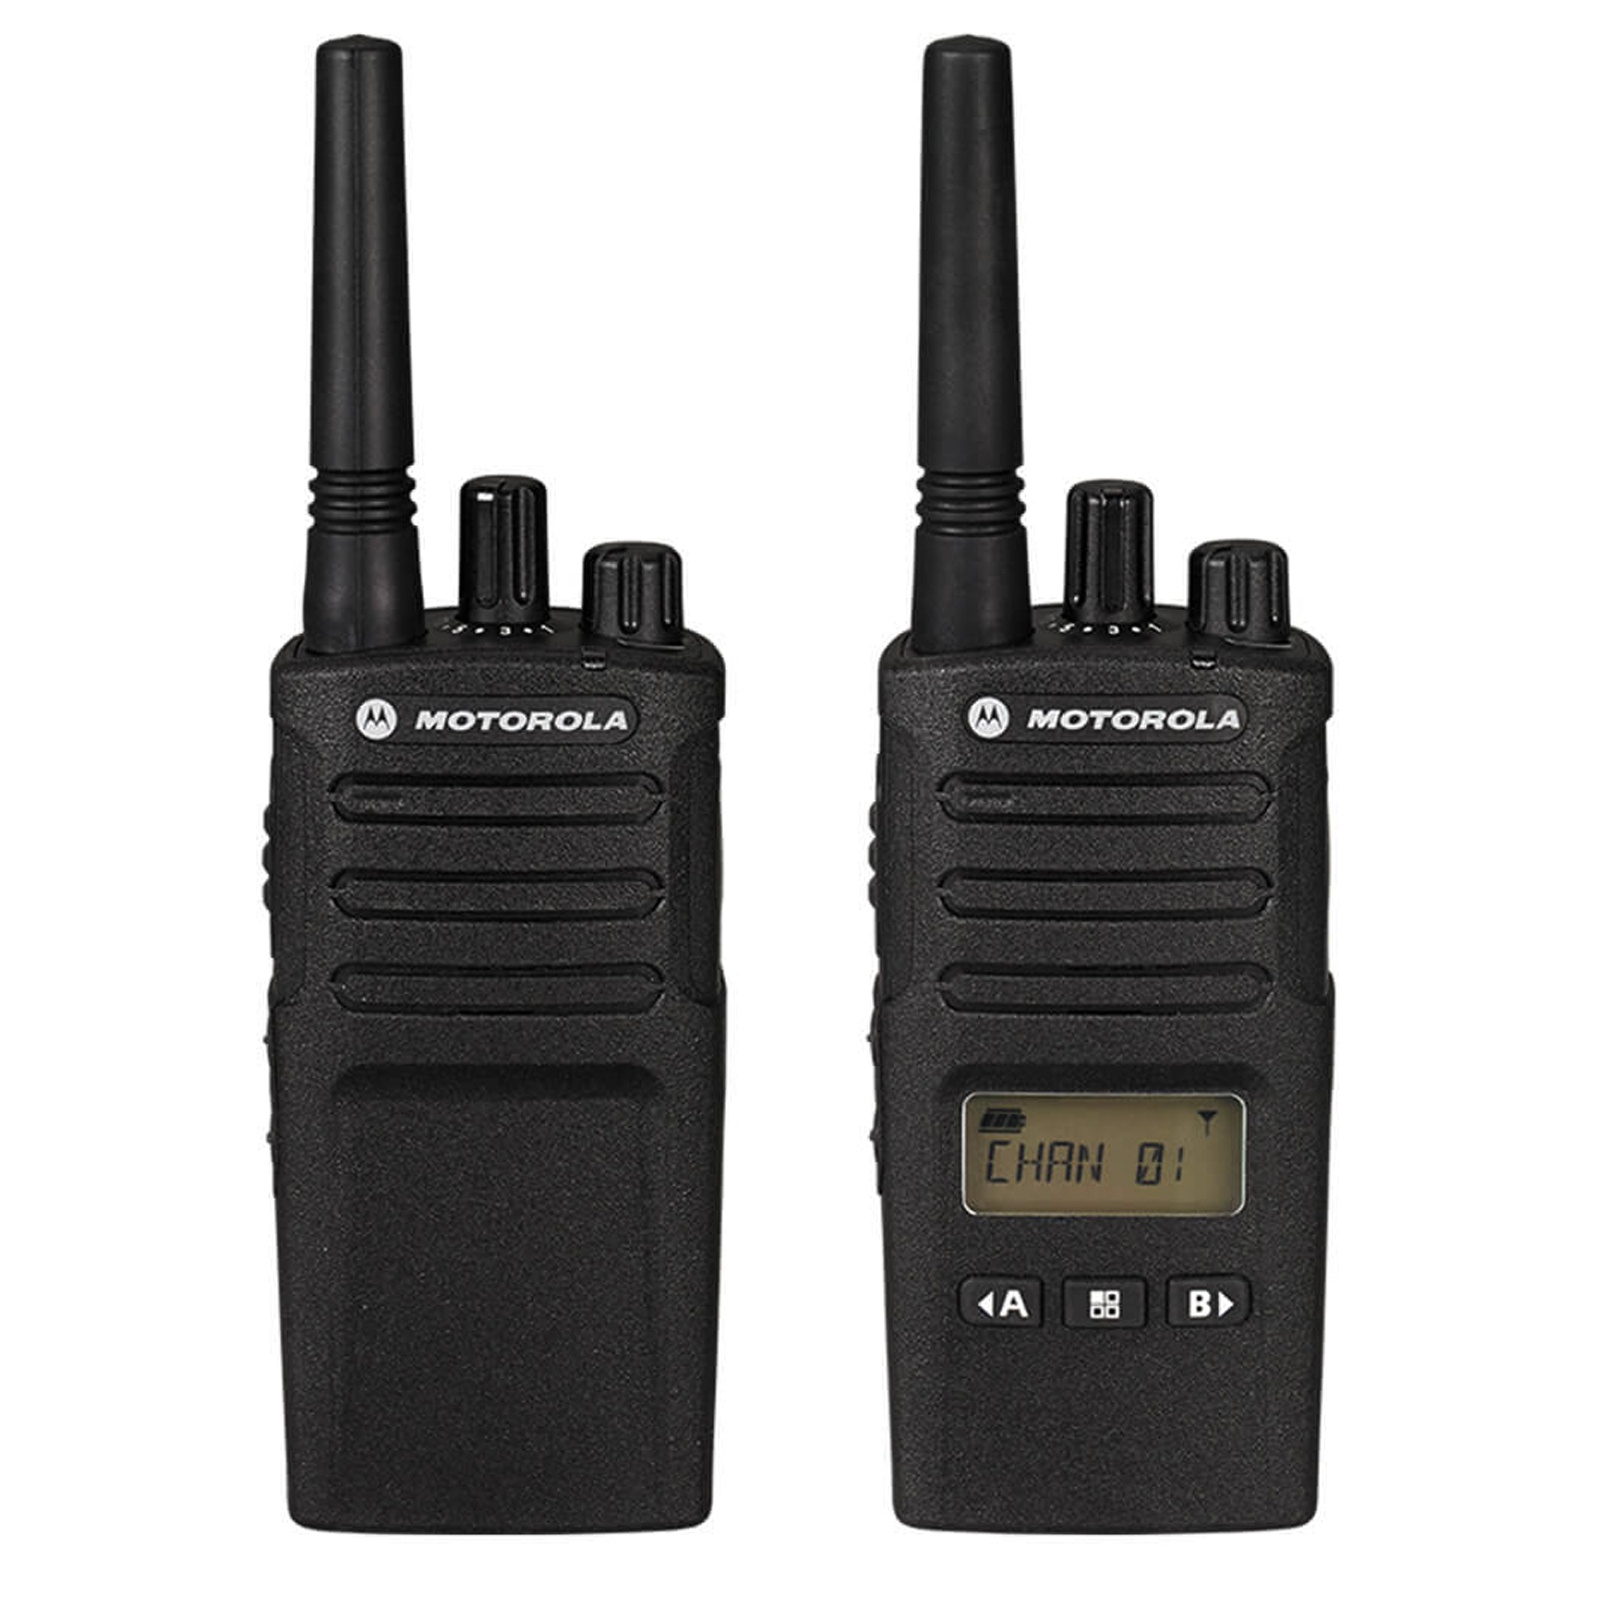 Telestar System Telecommunications Rome (Italy) Unlicensed PMR446 Two-Way Radios XT400